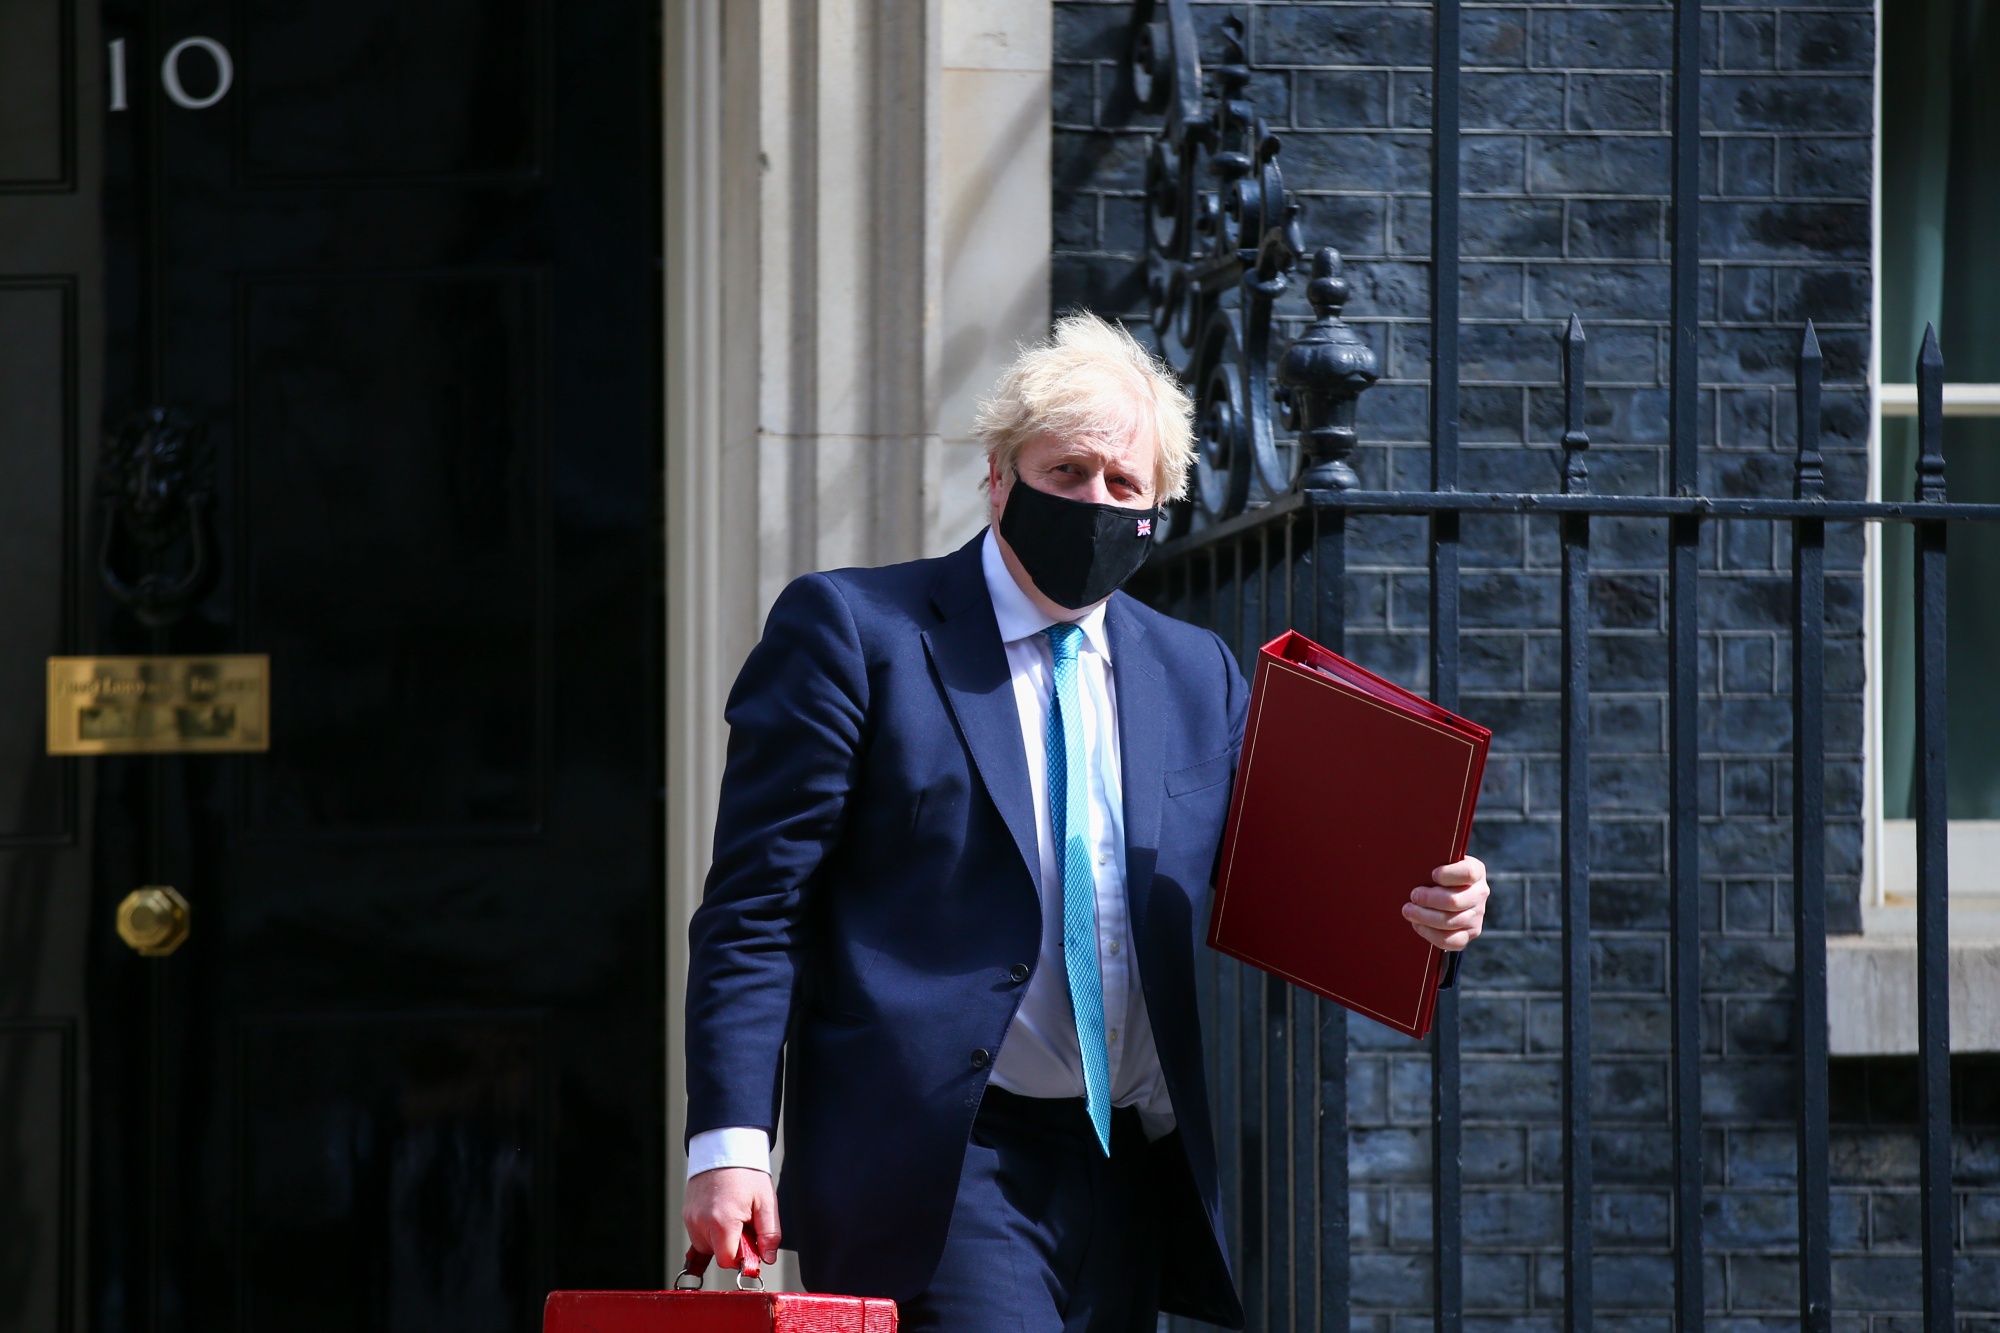 Boris Johnson leaves 10 Downing Street to attend the State Opening of Parliament in London, on May 11.